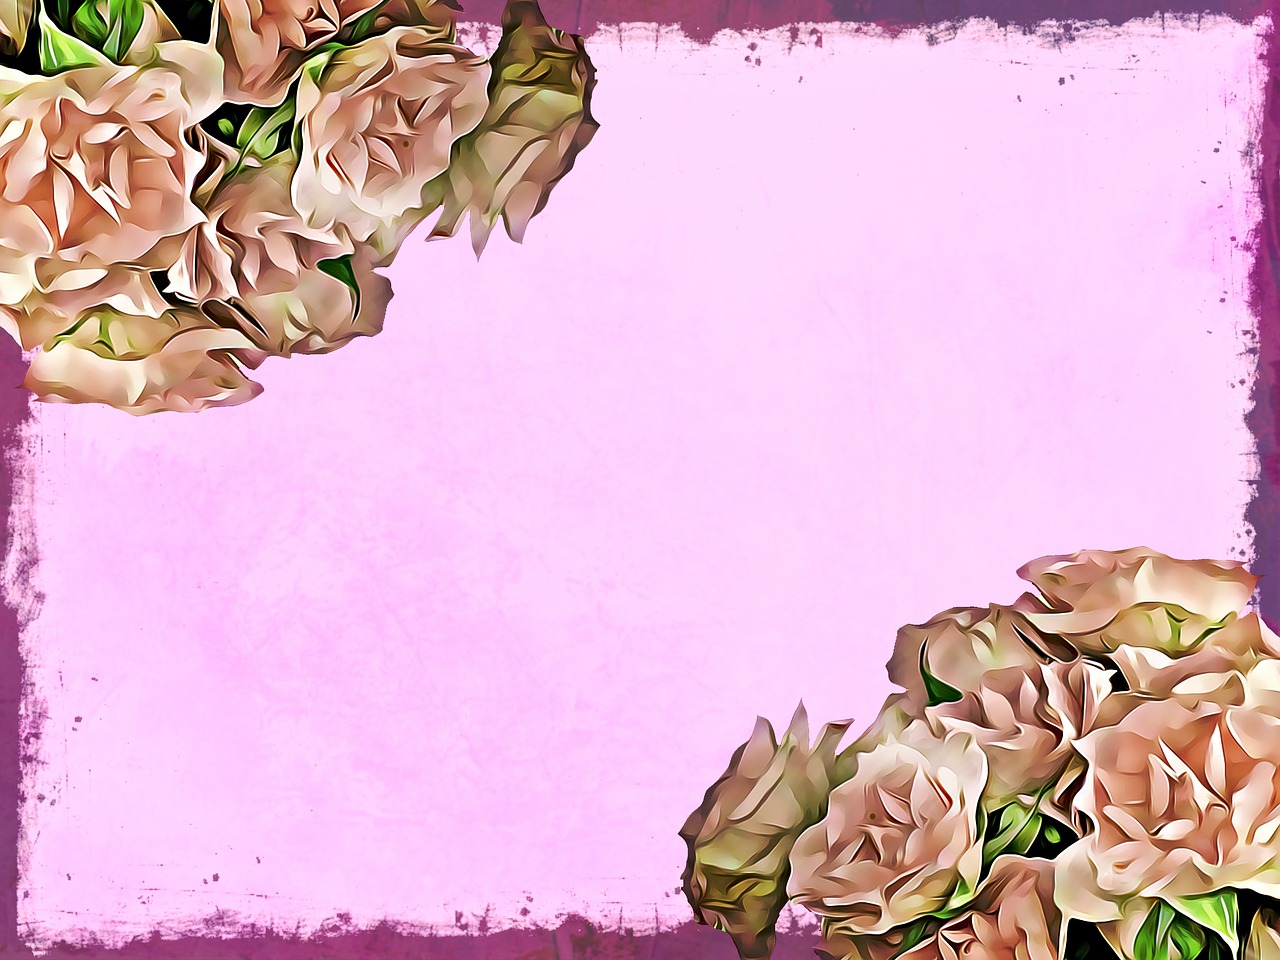 a picture of a bunch of flowers on a pink background, a digital painting, baroque, paper border, handcrafted paper background, abstract smokey roses, with blunt brown border